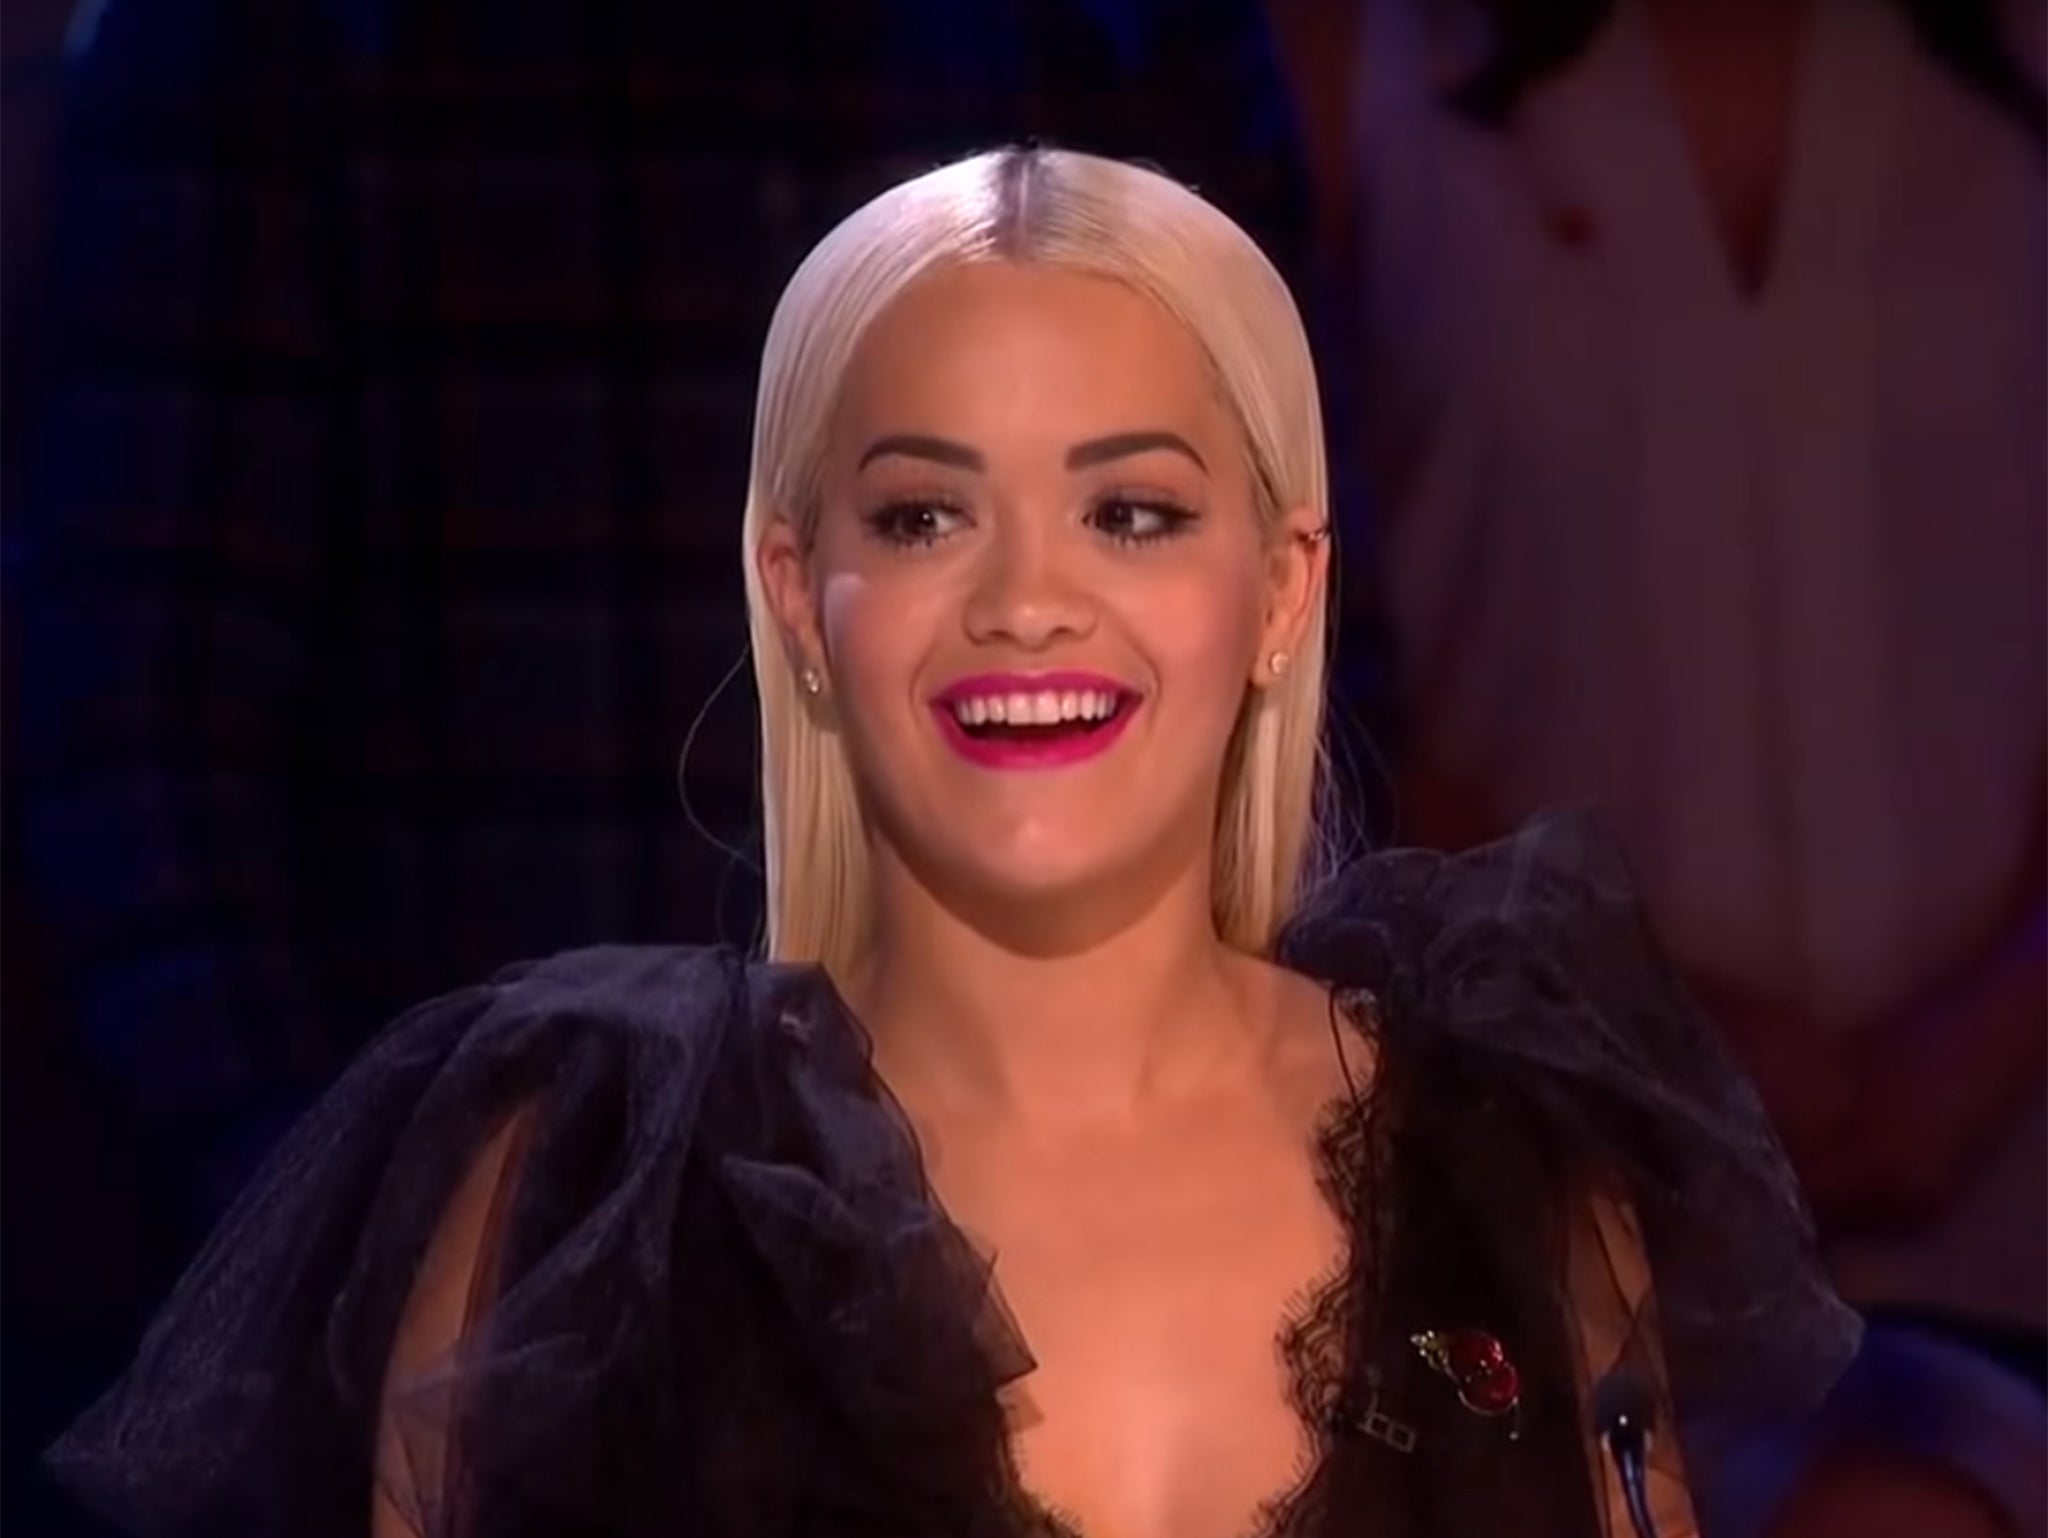 Rita Ora forgot the name of her contestant on The X Factor